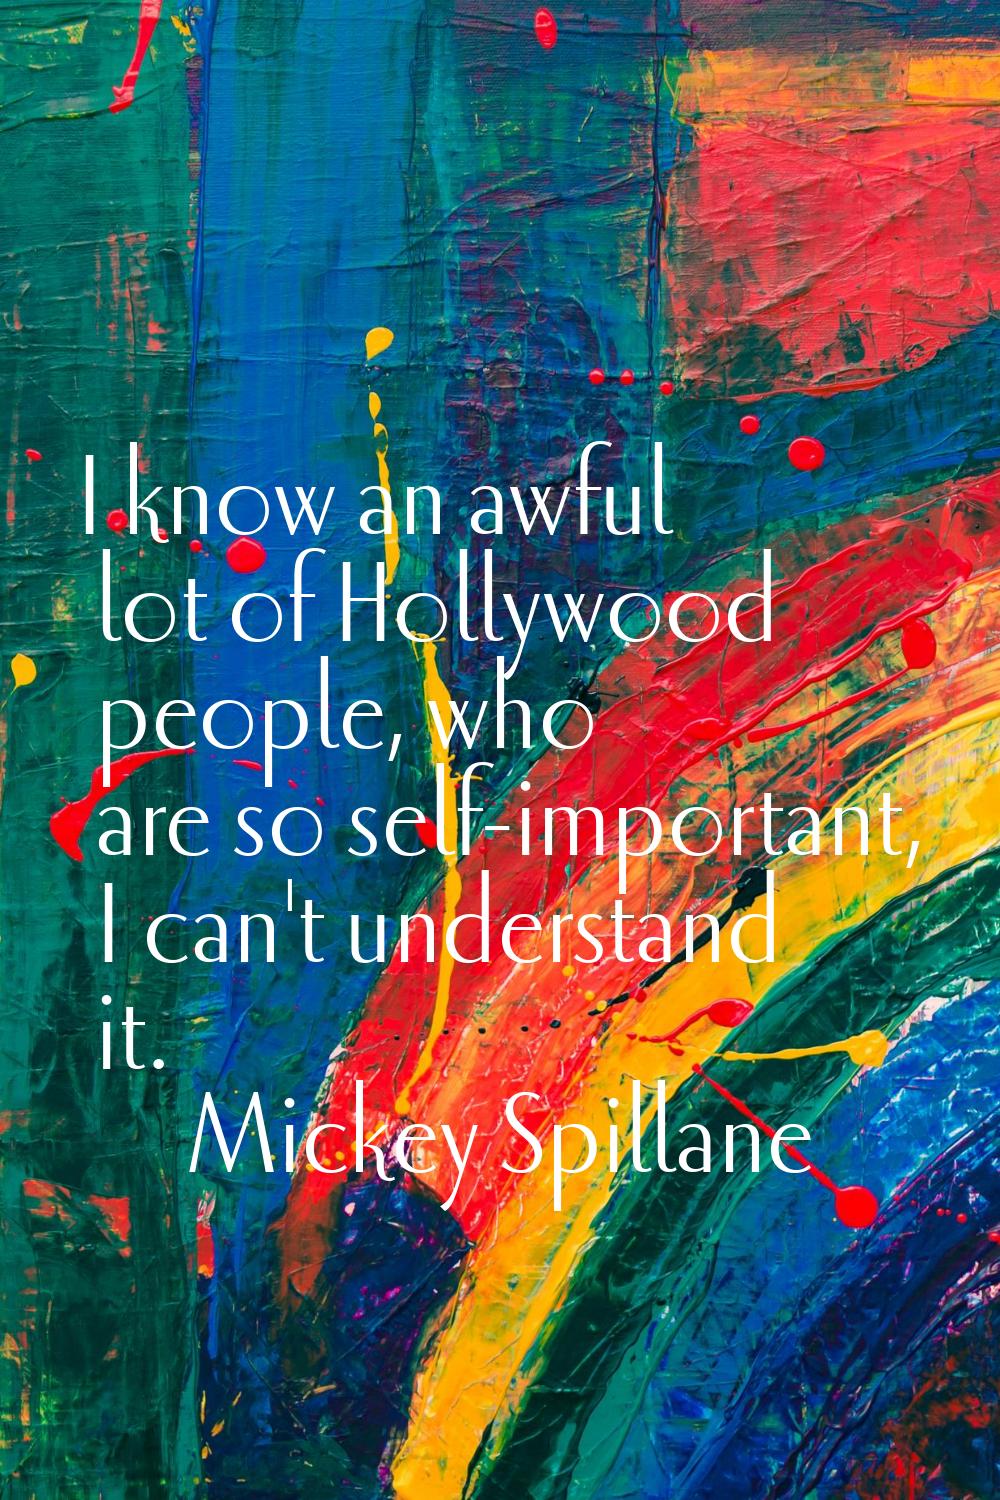 I know an awful lot of Hollywood people, who are so self-important, I can't understand it.